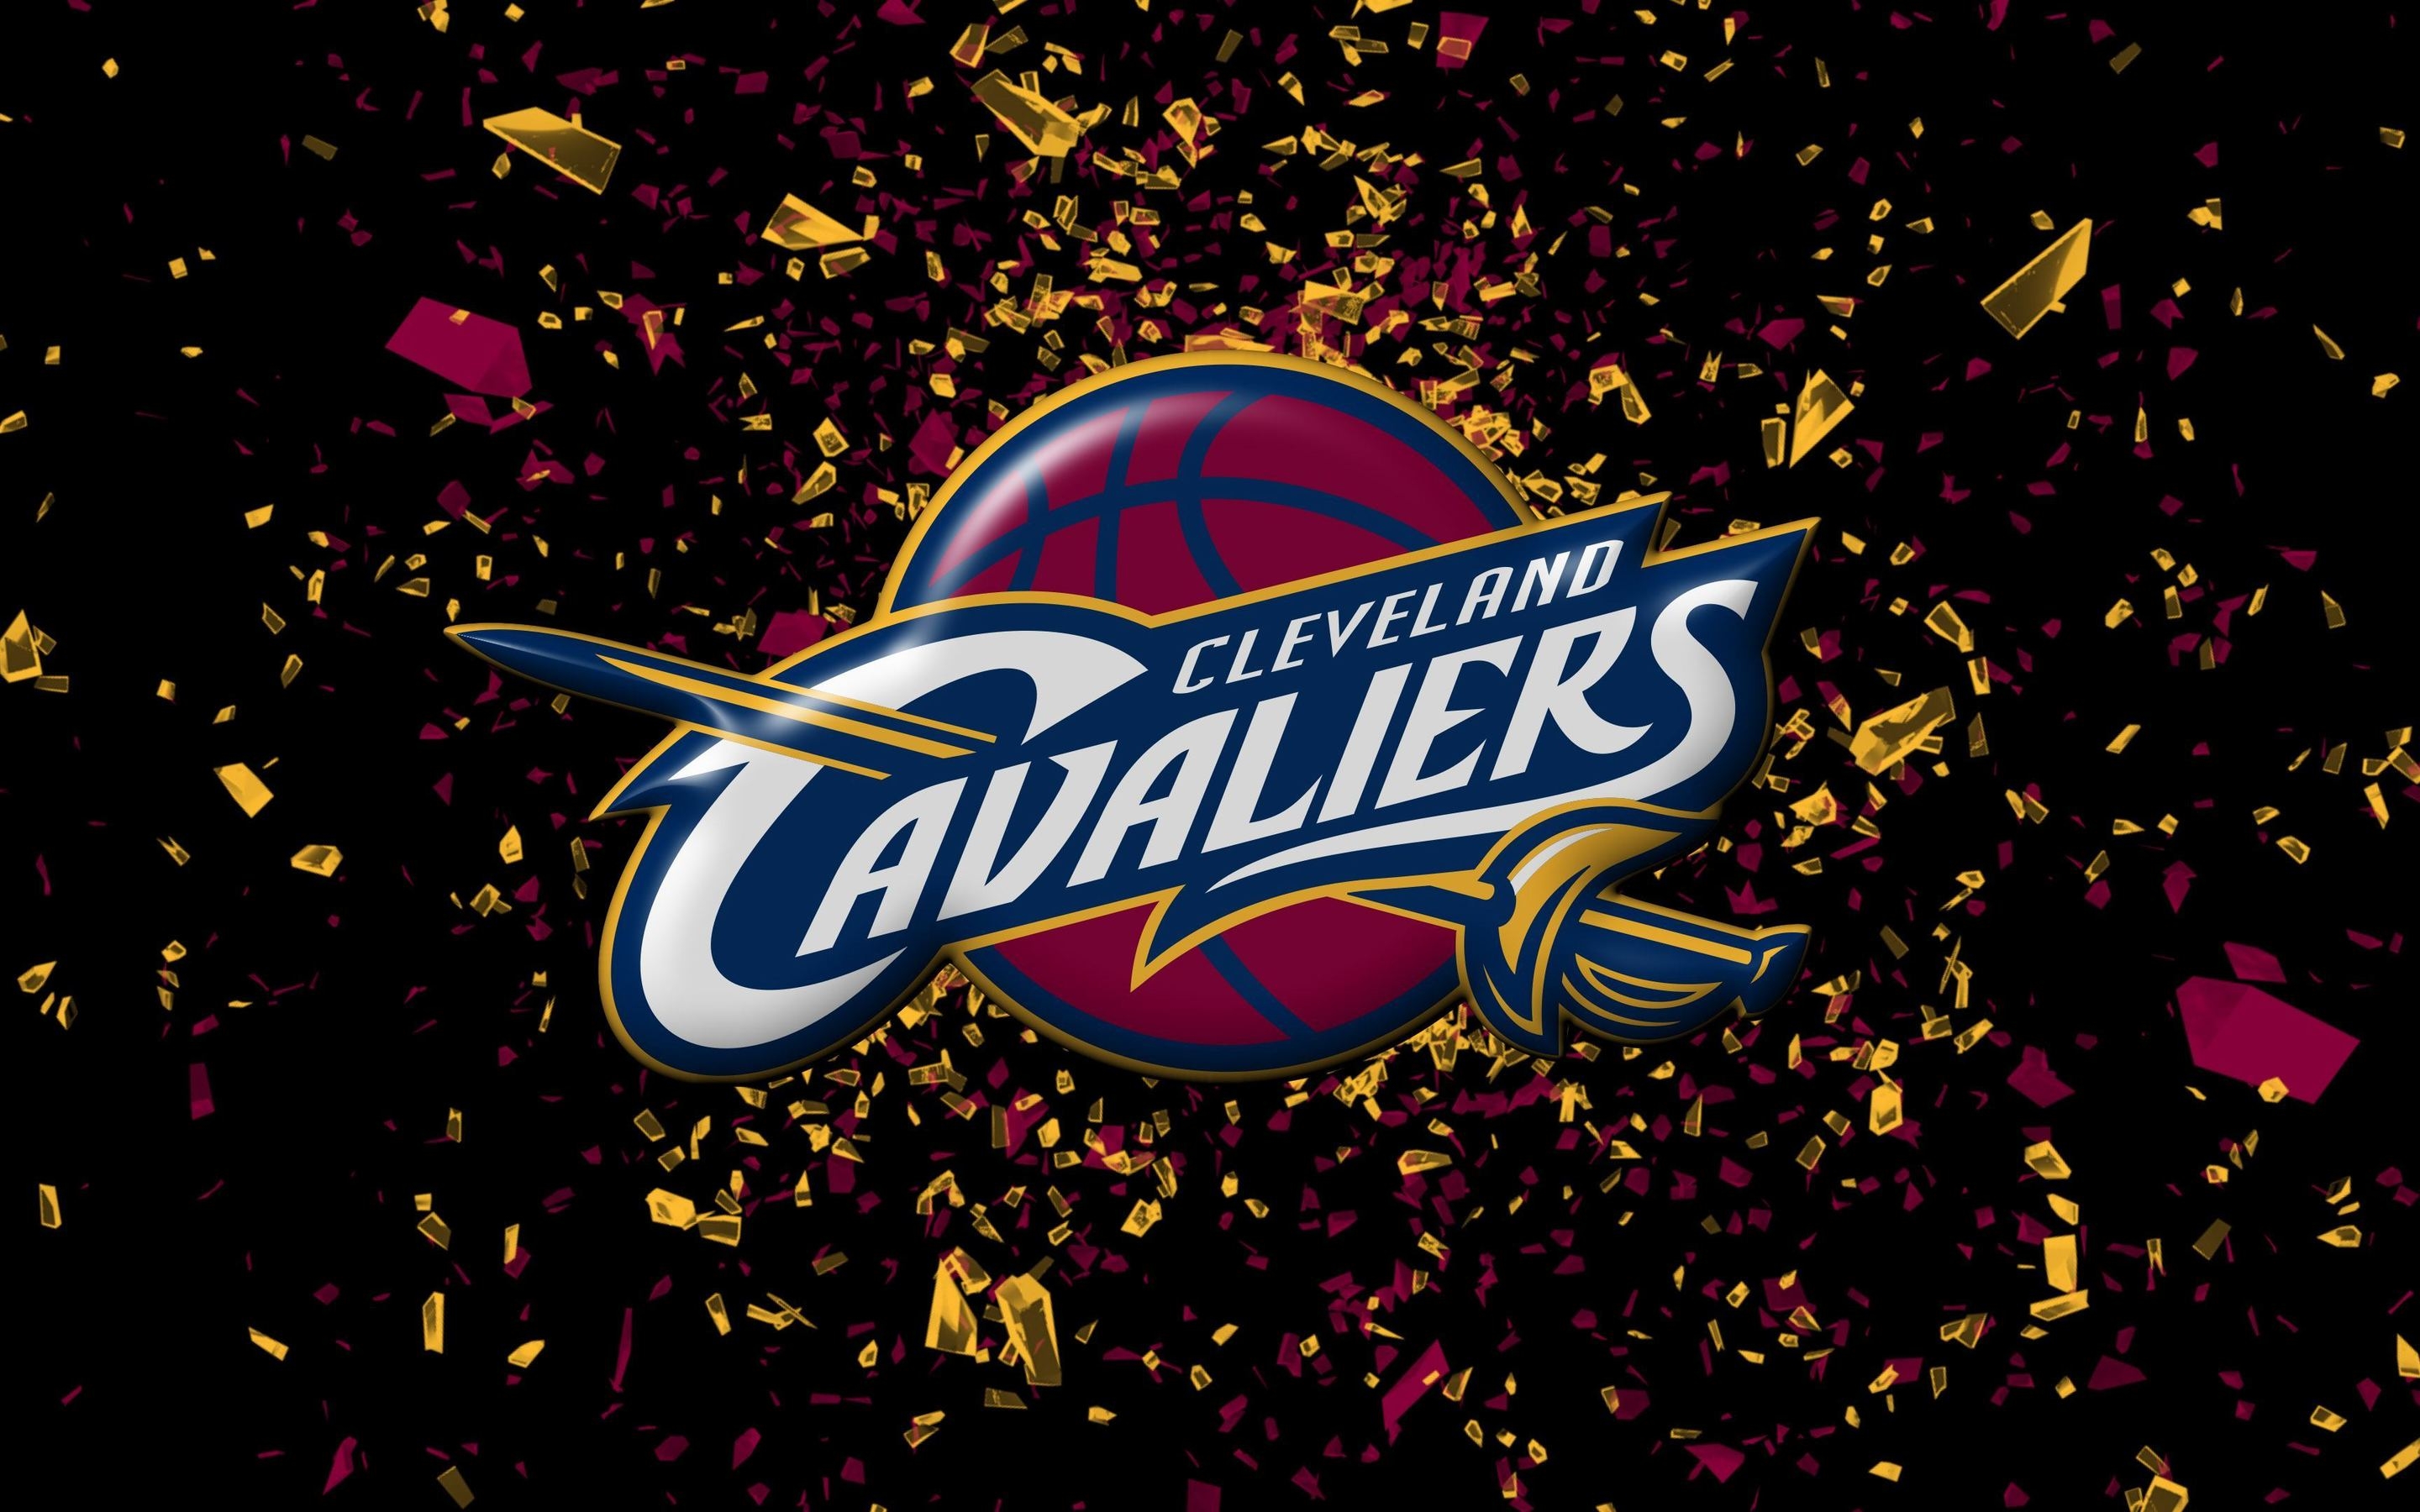 Cleveland Cavaliers for 2880 x 1800 Retina Display resolution